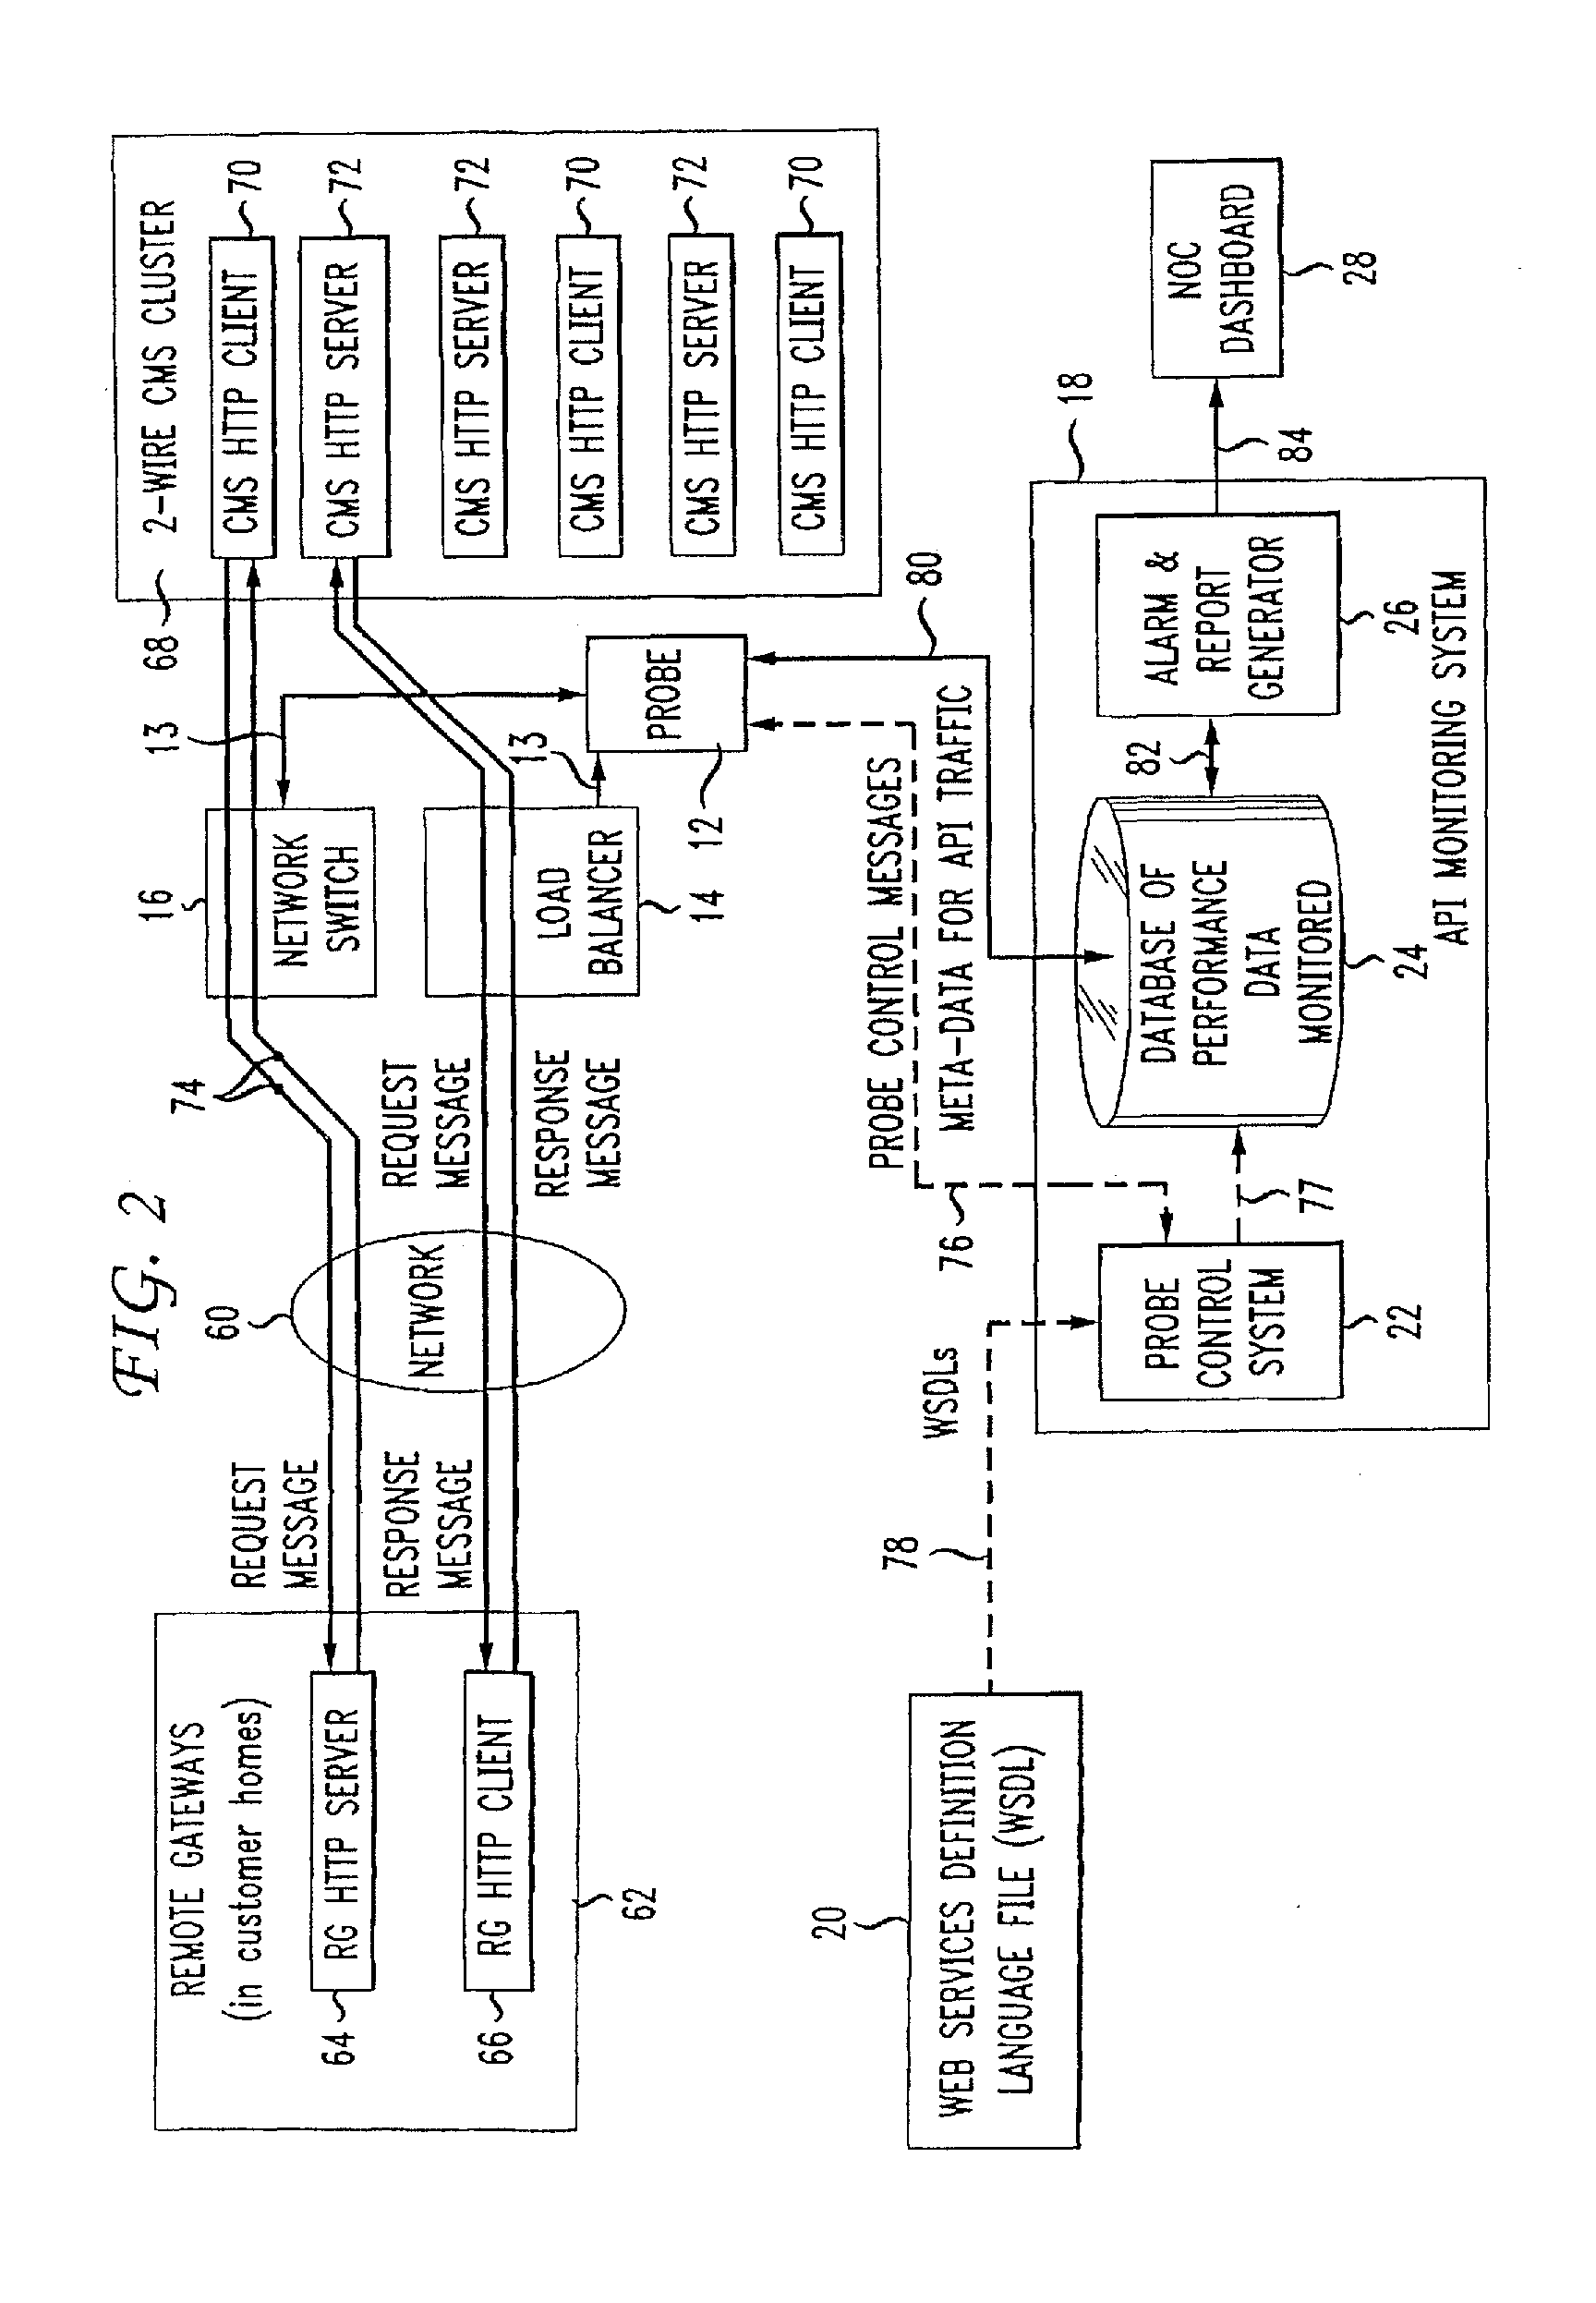 Method and Apparatus for Measuring the End-to-End Performance and Capacity of Complex Network Service